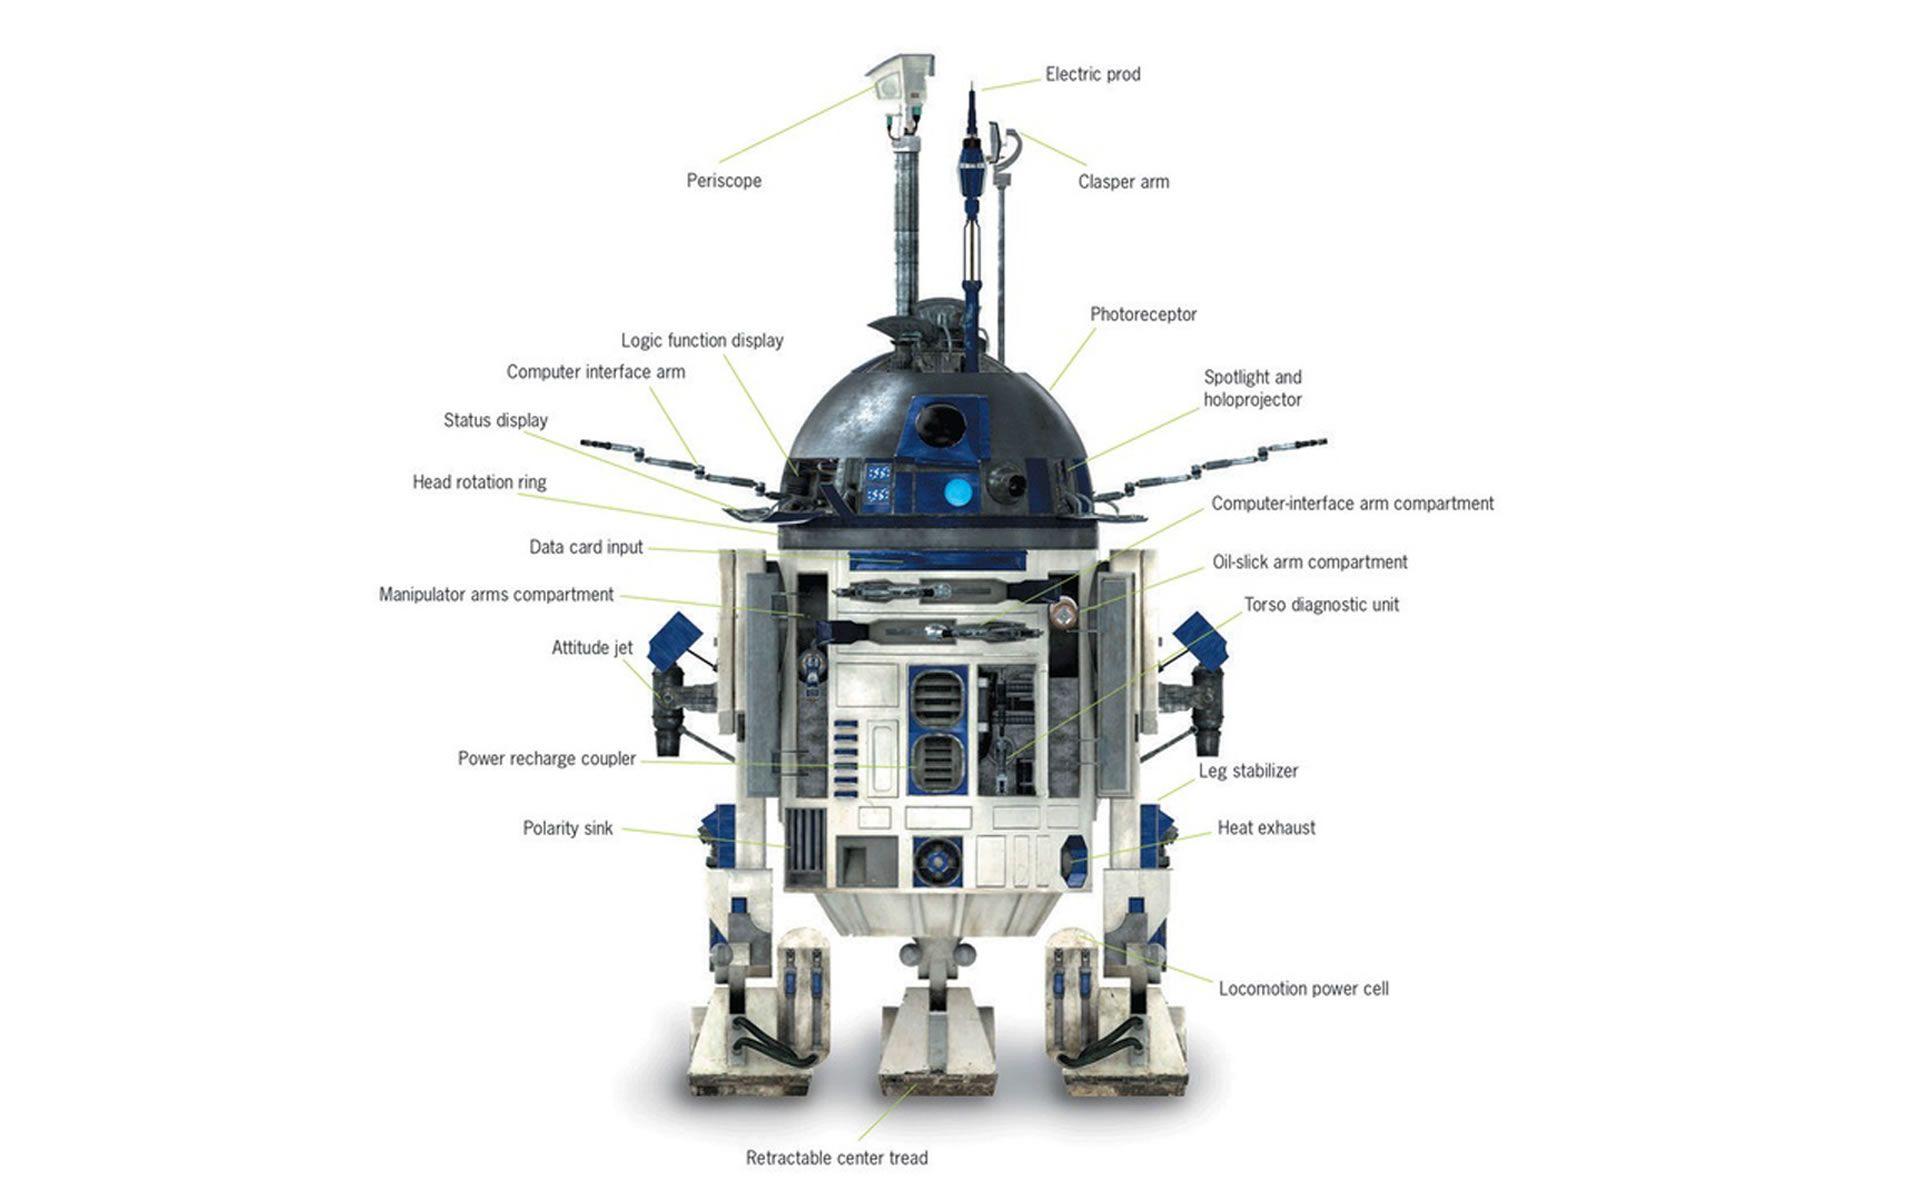 Related Pictures Star Wars R2d2 Iphone Hd Wallpapers Lowrider Car